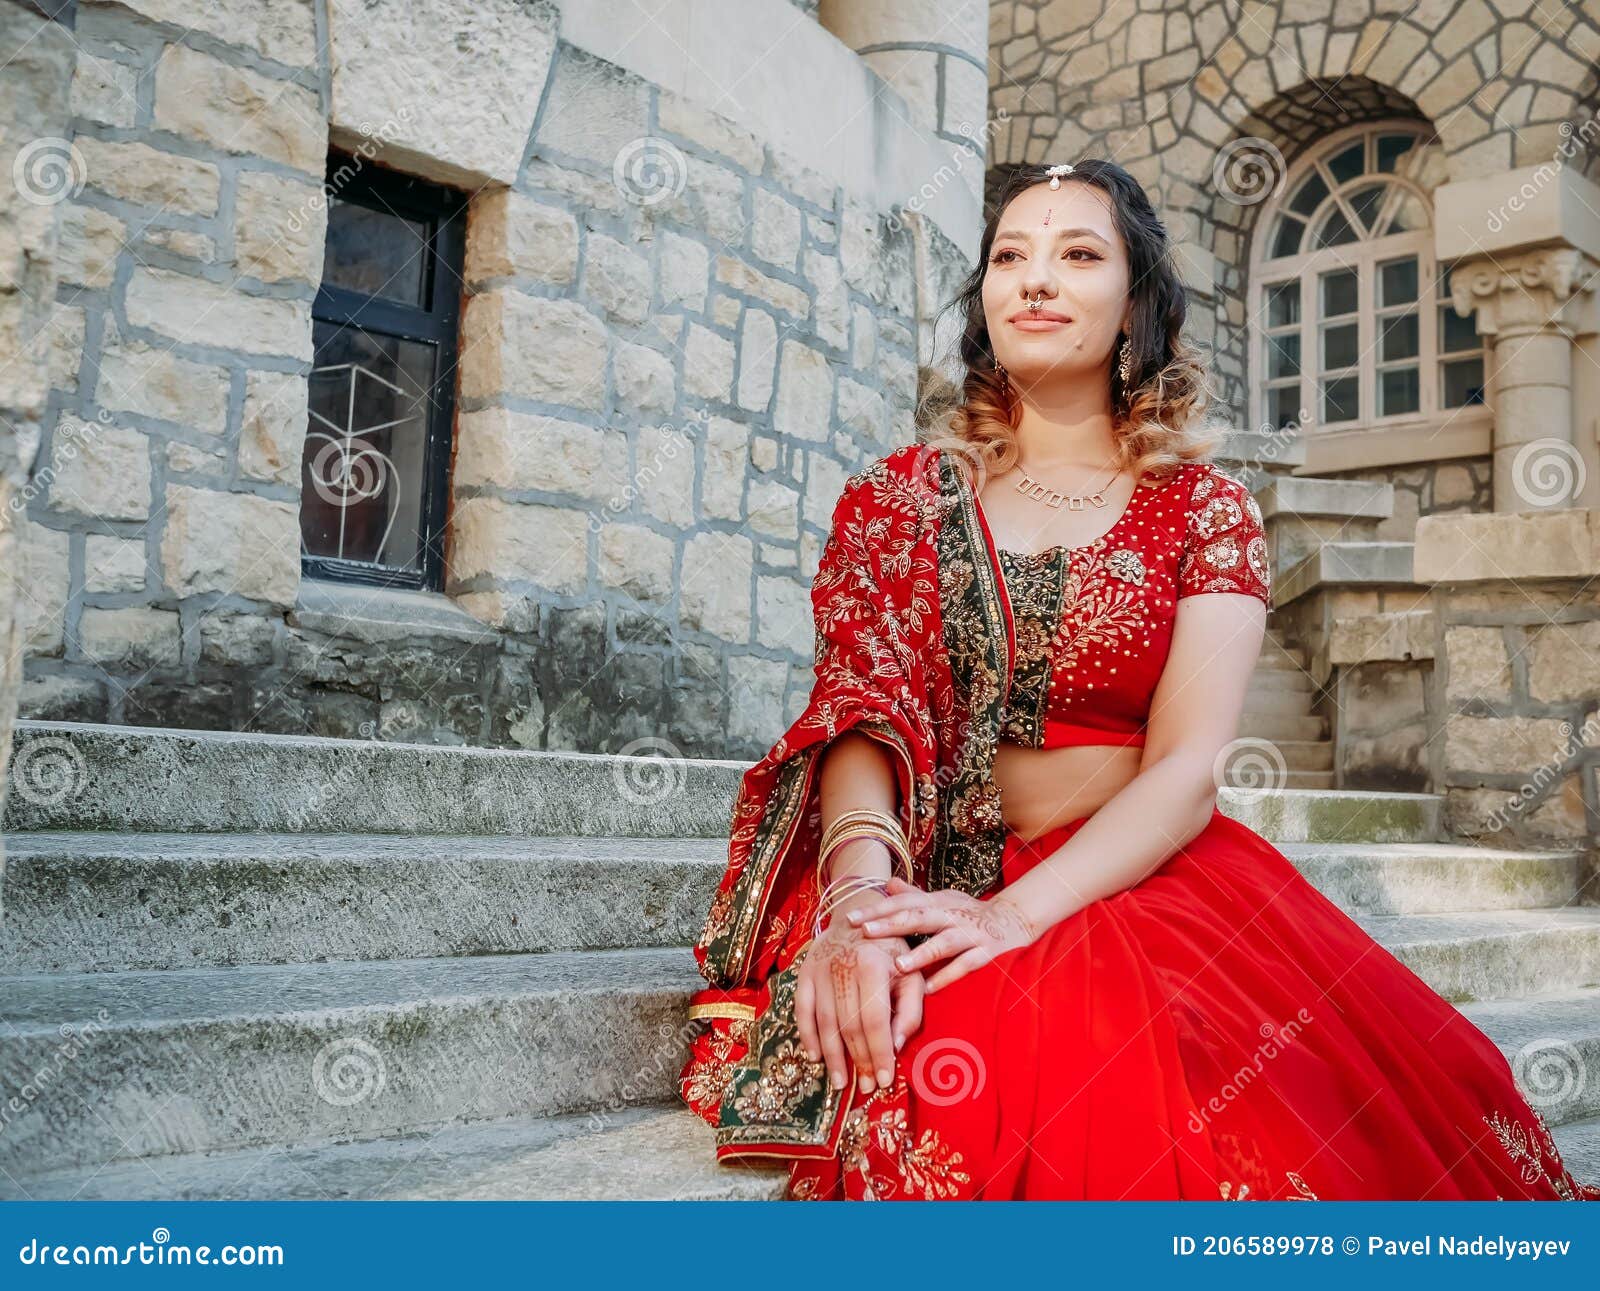 Flyrobe on Instagram: “Wedding season has arrived & so has the Flyrobe  Wedding … | Trendy outfits indian, Fashion model poses, Pose for girls  photoshoot traditional